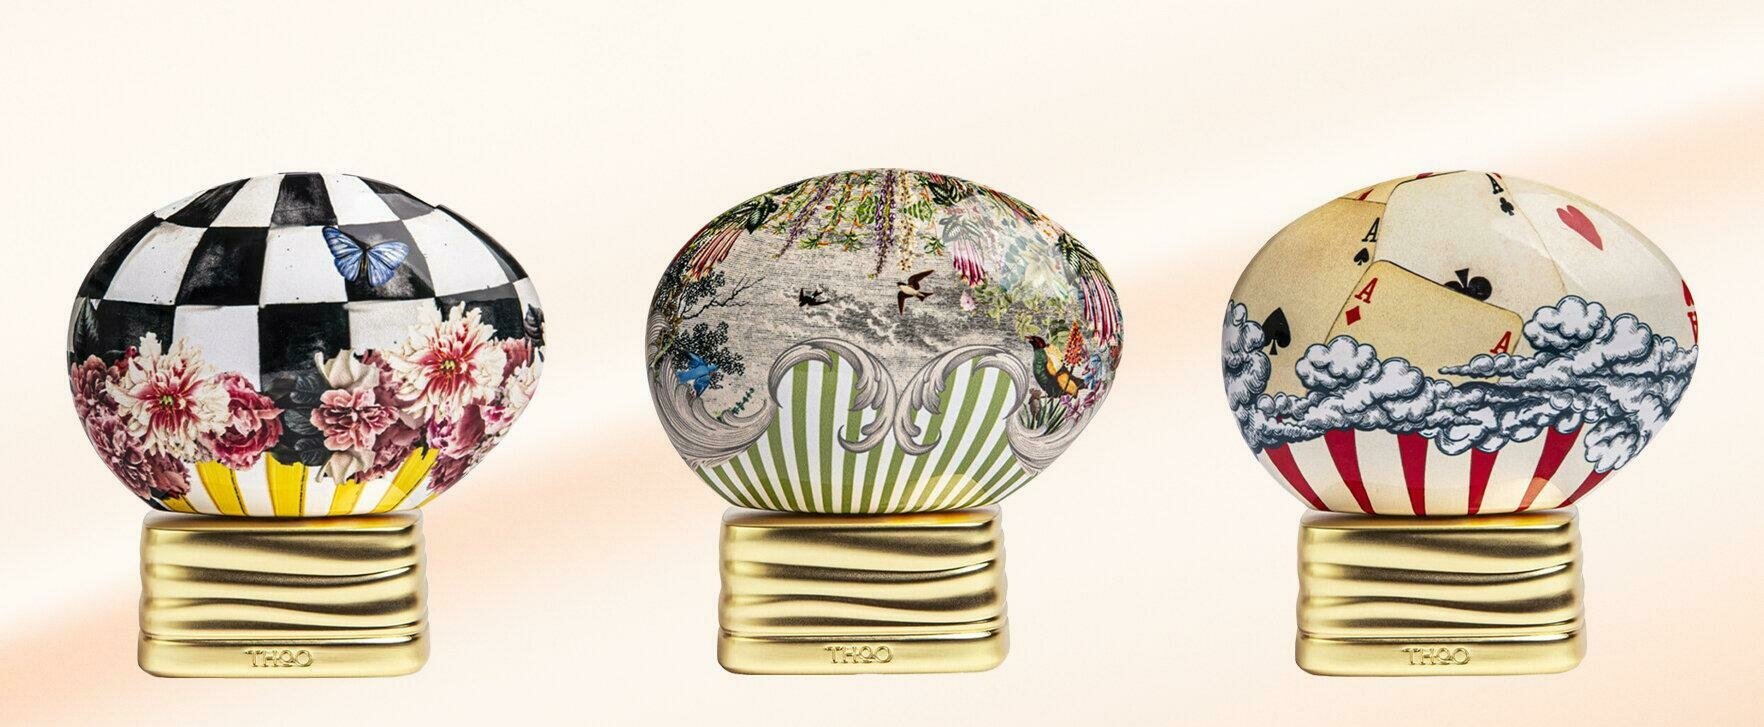 Sparkling and Eccentric: The New Crazy Collection From the House of Oud